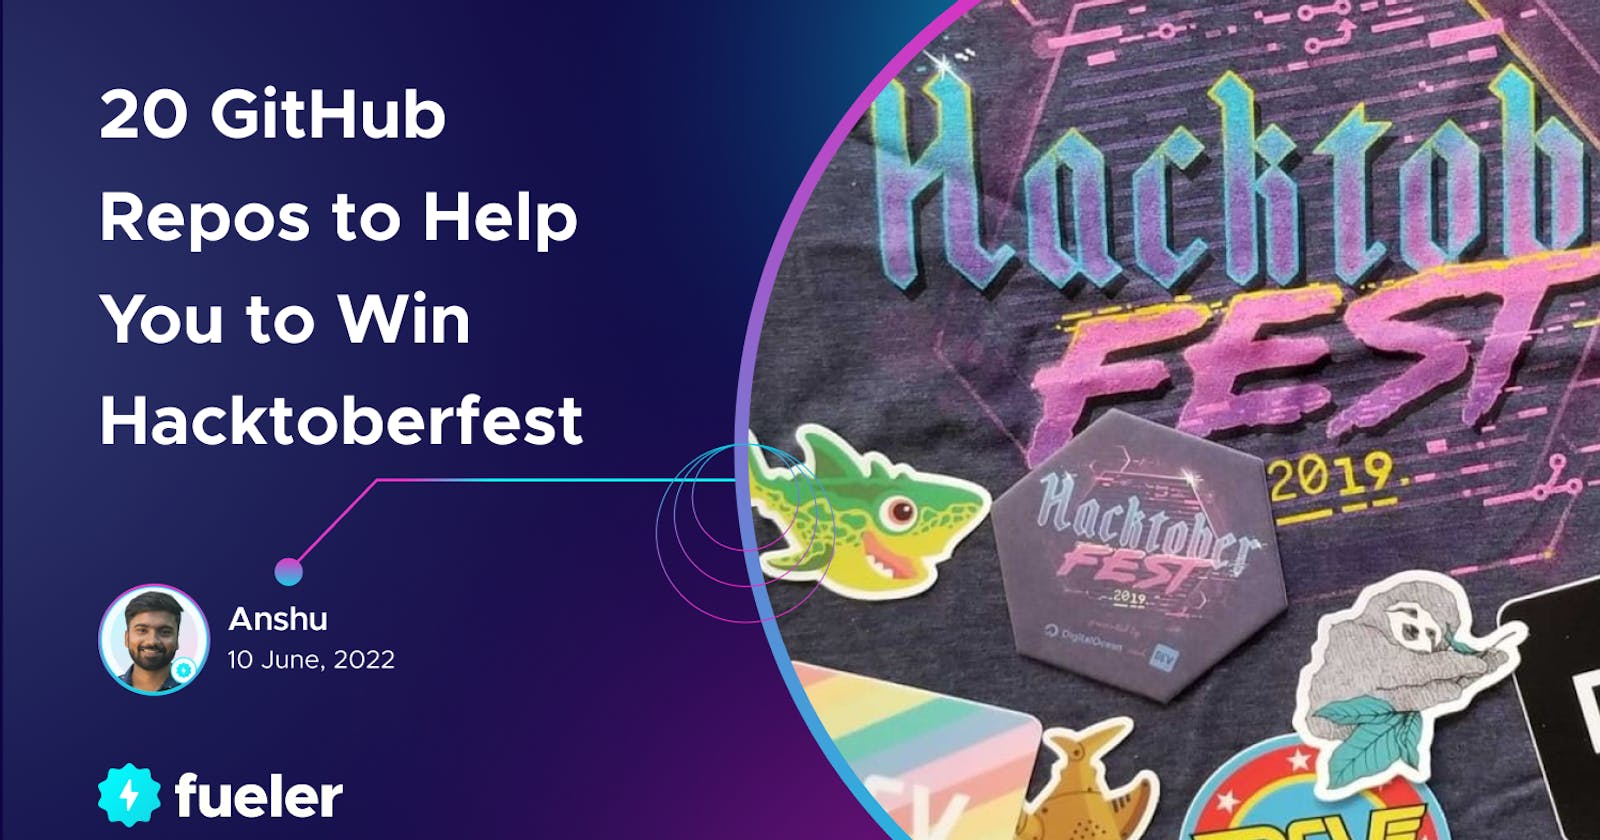 20 GitHub Repos to Help You to Win Hacktoberfest